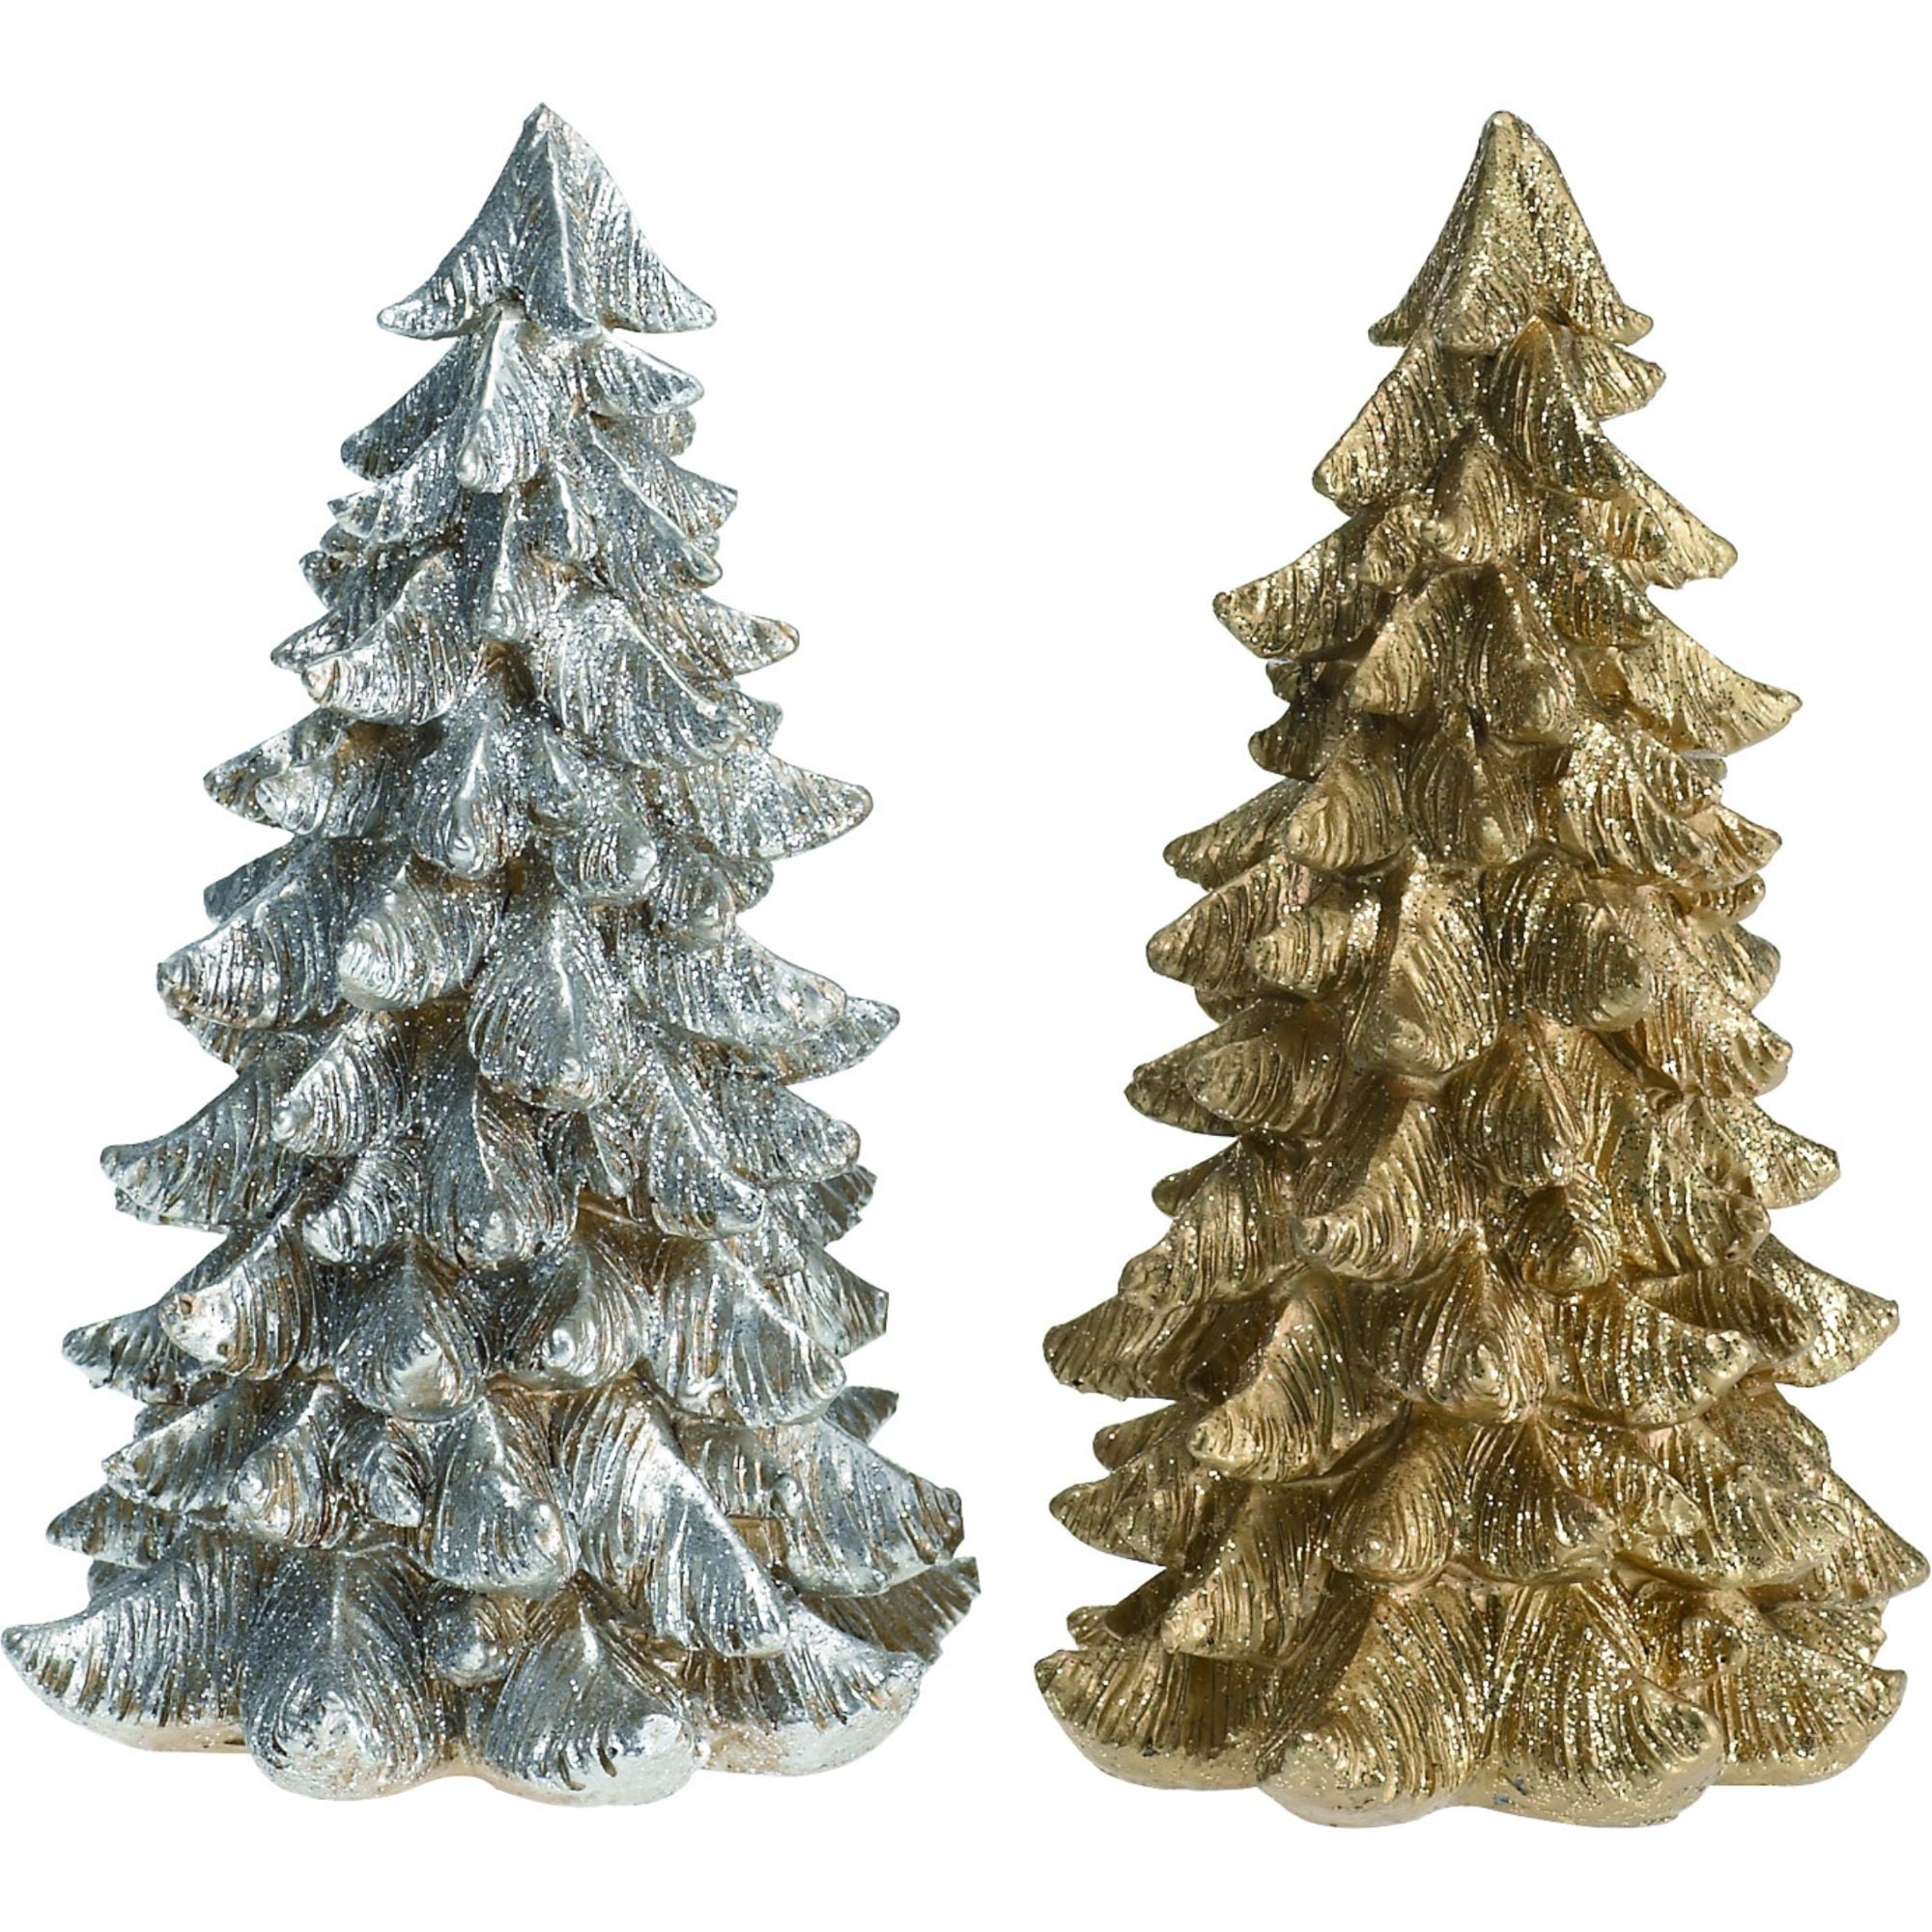 Set of 3 Silver Glittered Christmas Trees 6.25 inches to 9.5 inches Tall